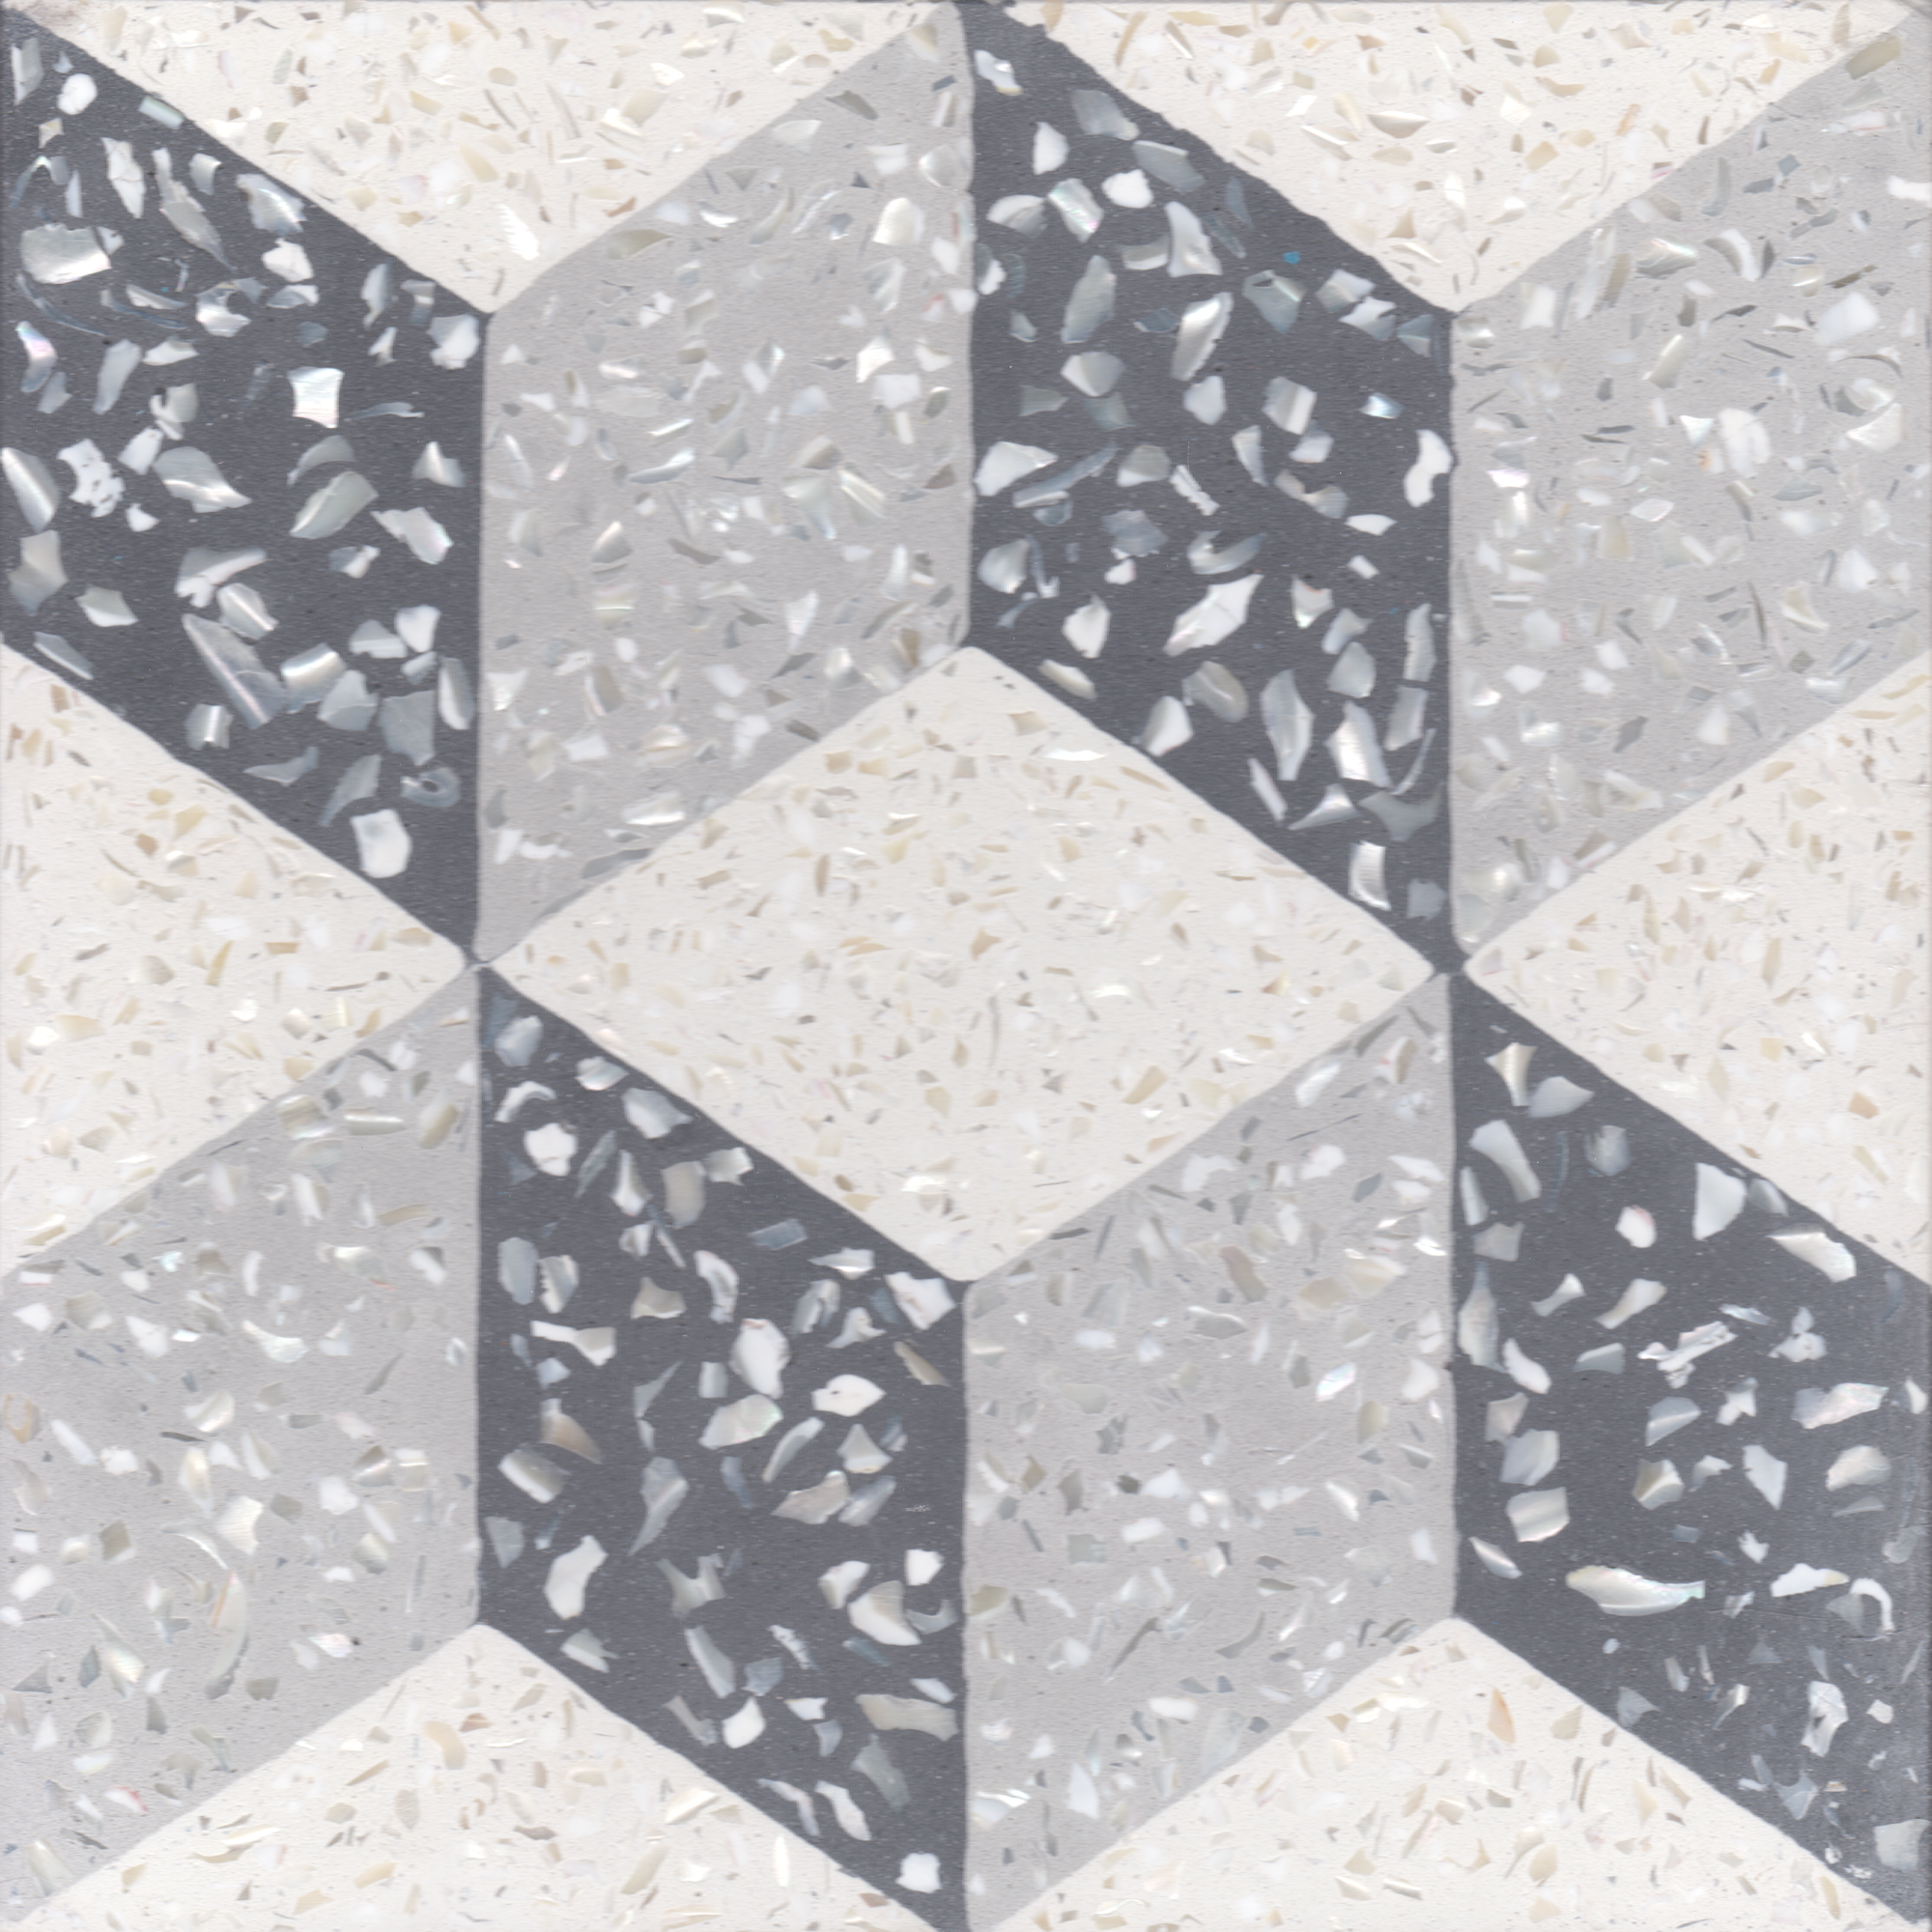 Villa Laggon Tile's Cubes A with mother of pearl terrazzo